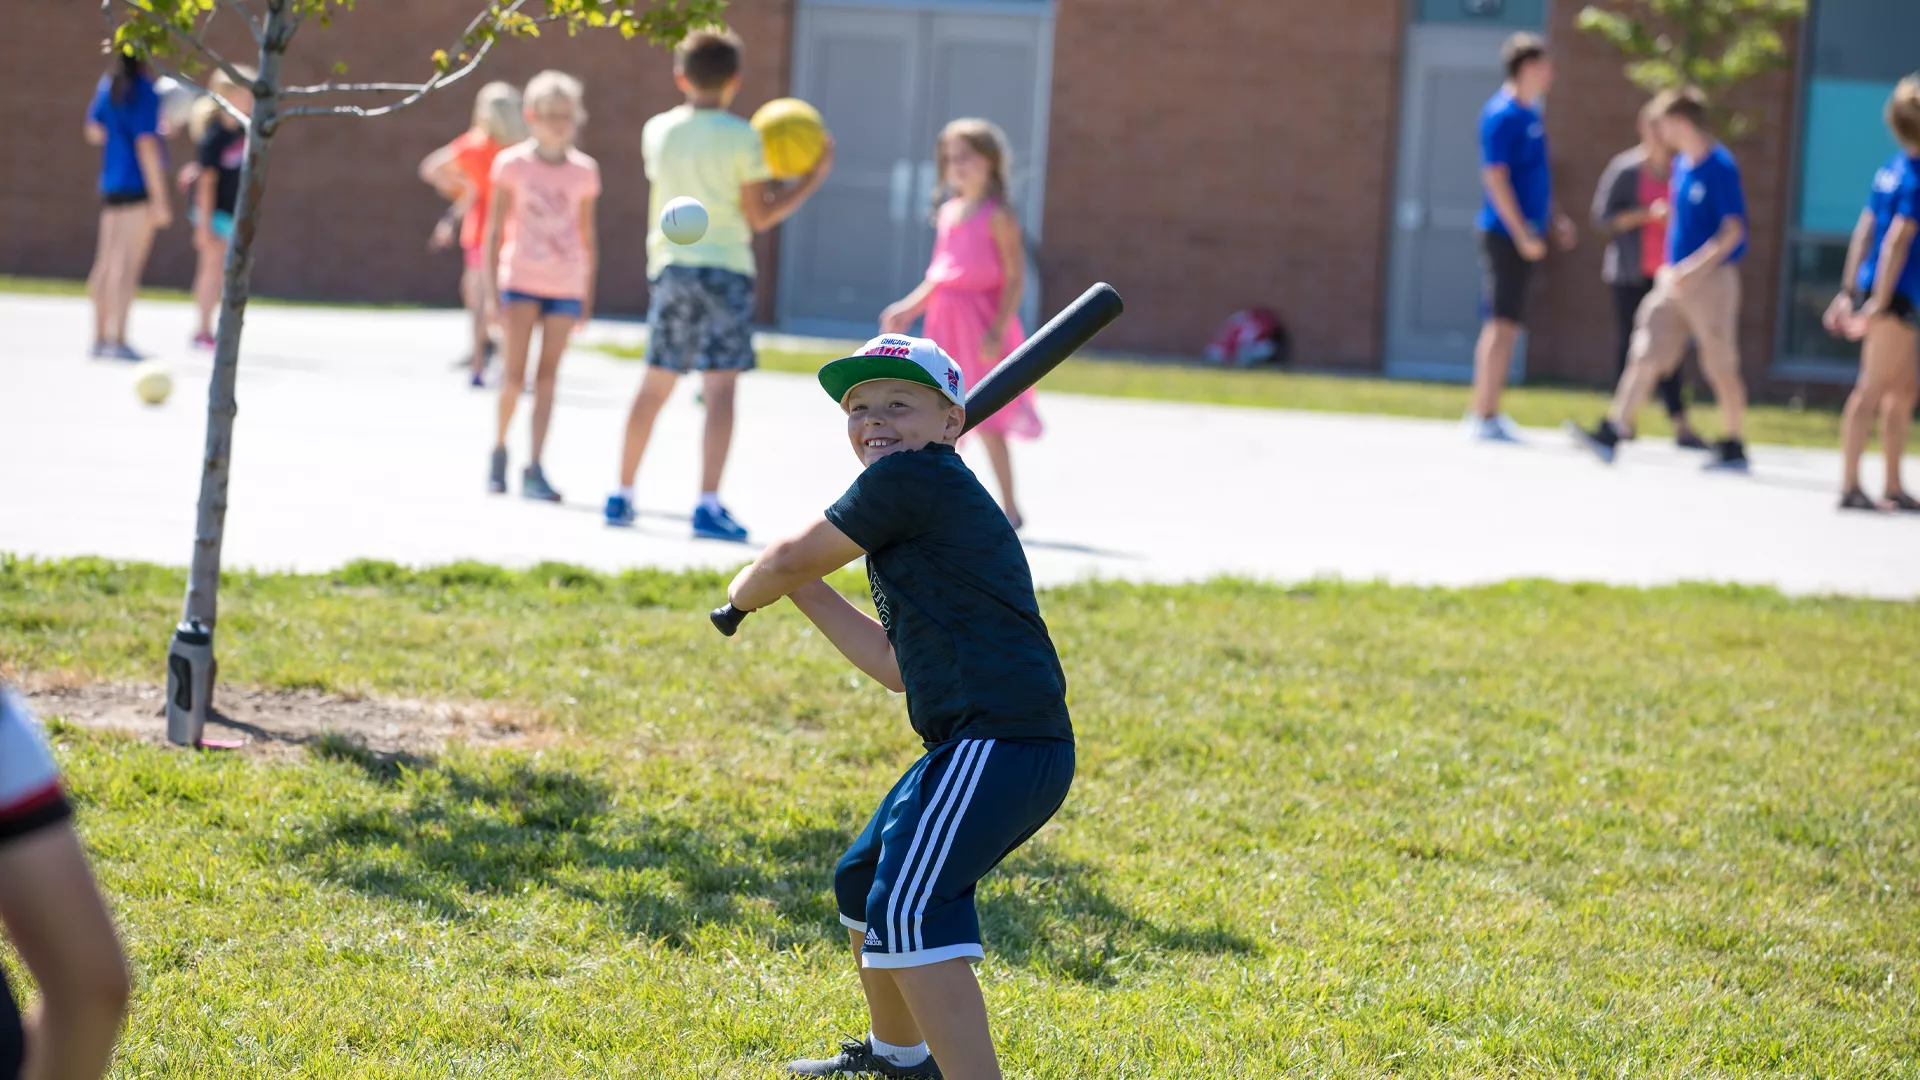 Boy smiles as he gets ready to bat during a game of baseball at day camp.